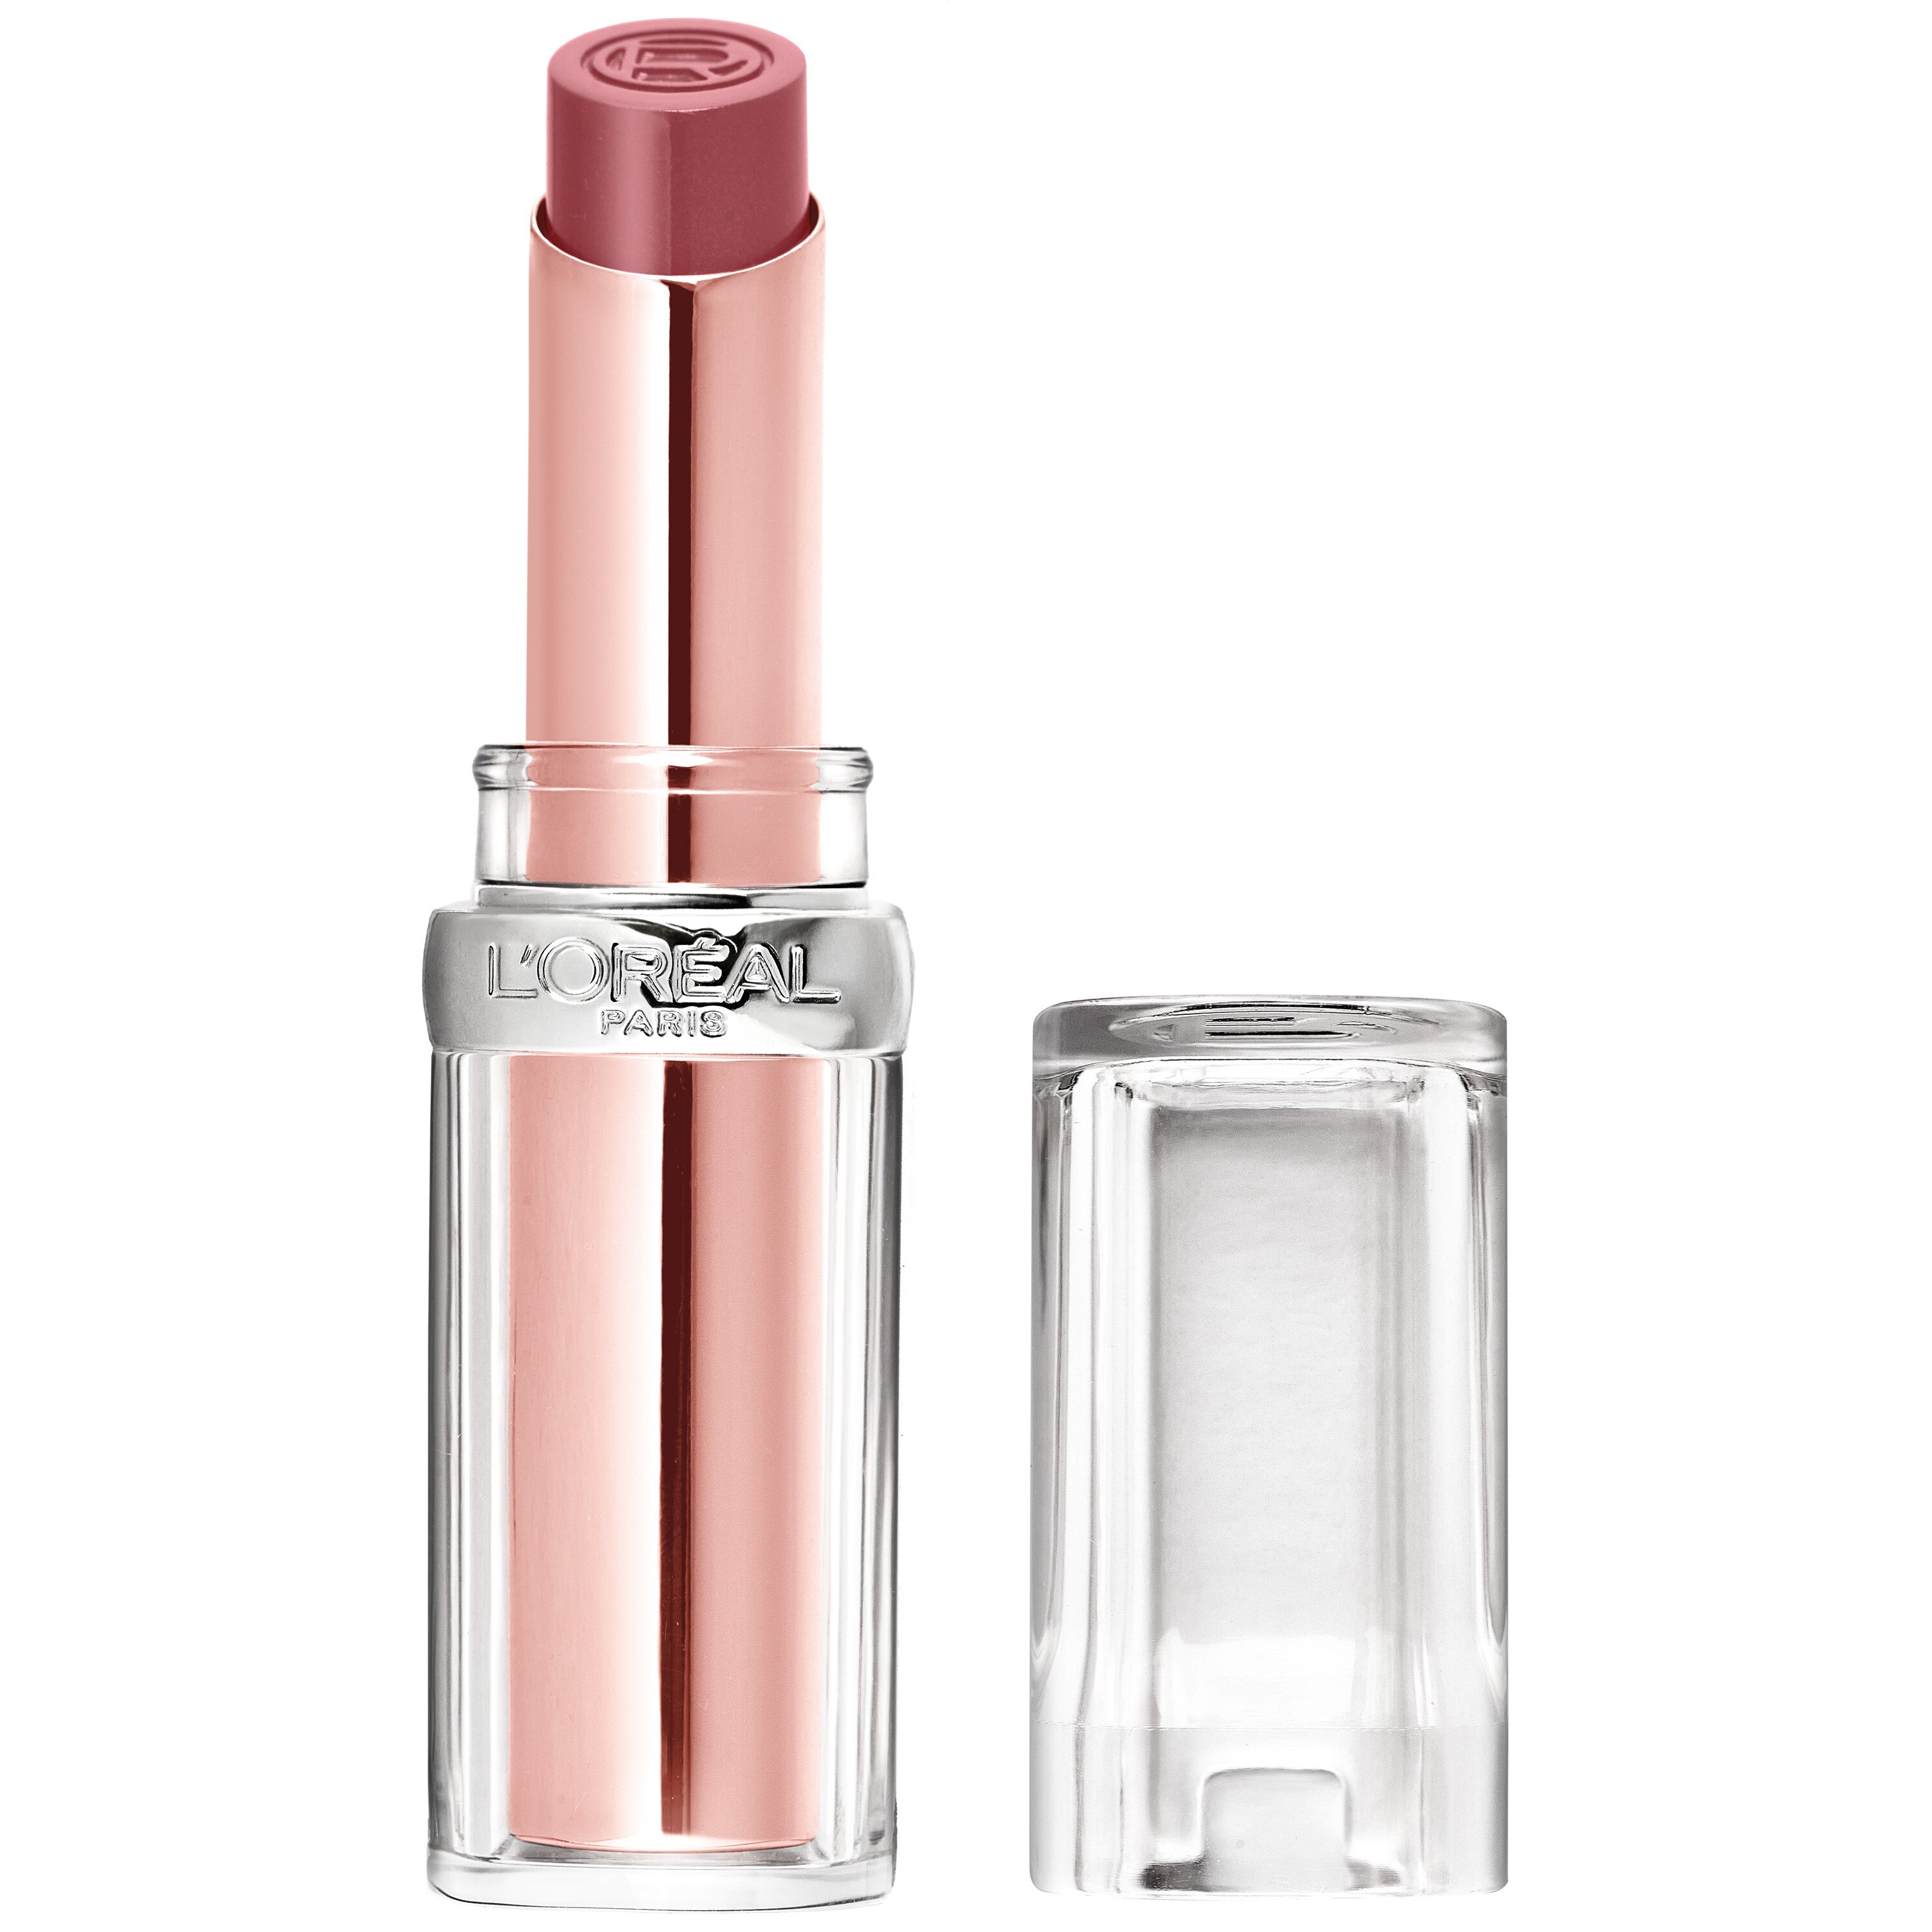 L'Oreal Paris Glow Paradise Balm-in-Lipstick With Pomegranate Extract, Mulberry Bliss, 0.1 Oz - 0.23 Oz , CVS